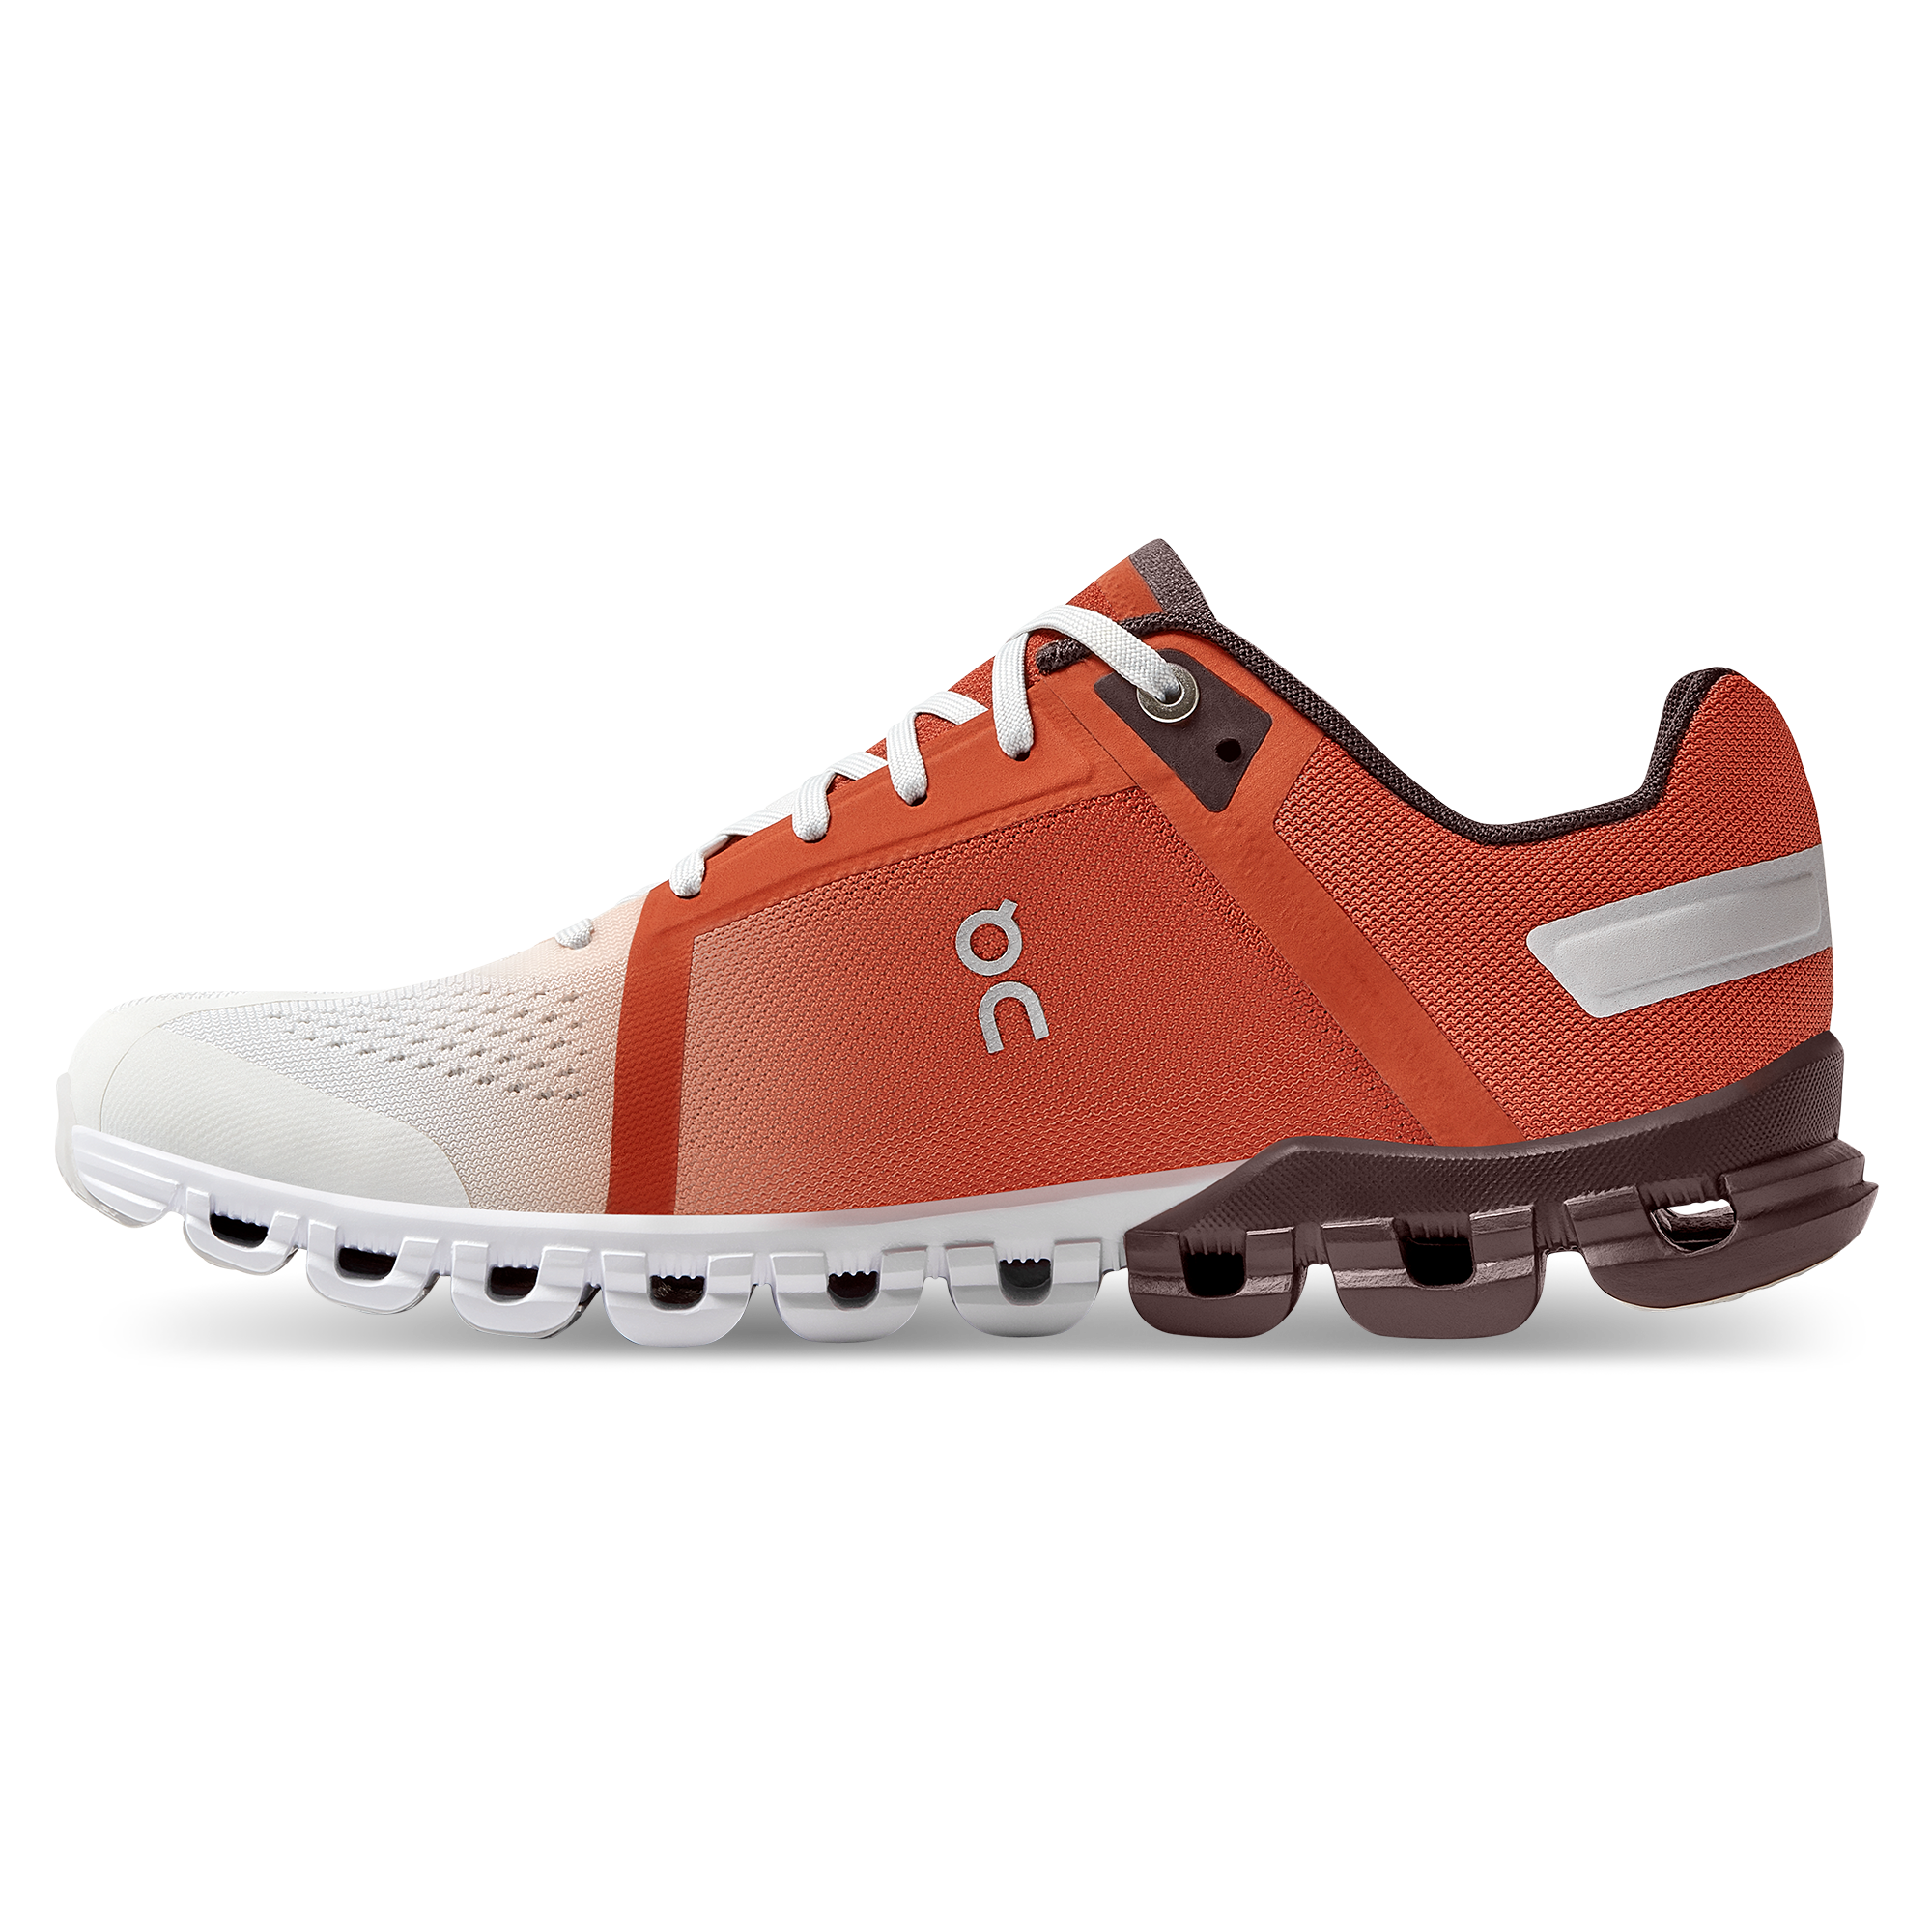 Women's Cloudflow | Rust & White | On United States